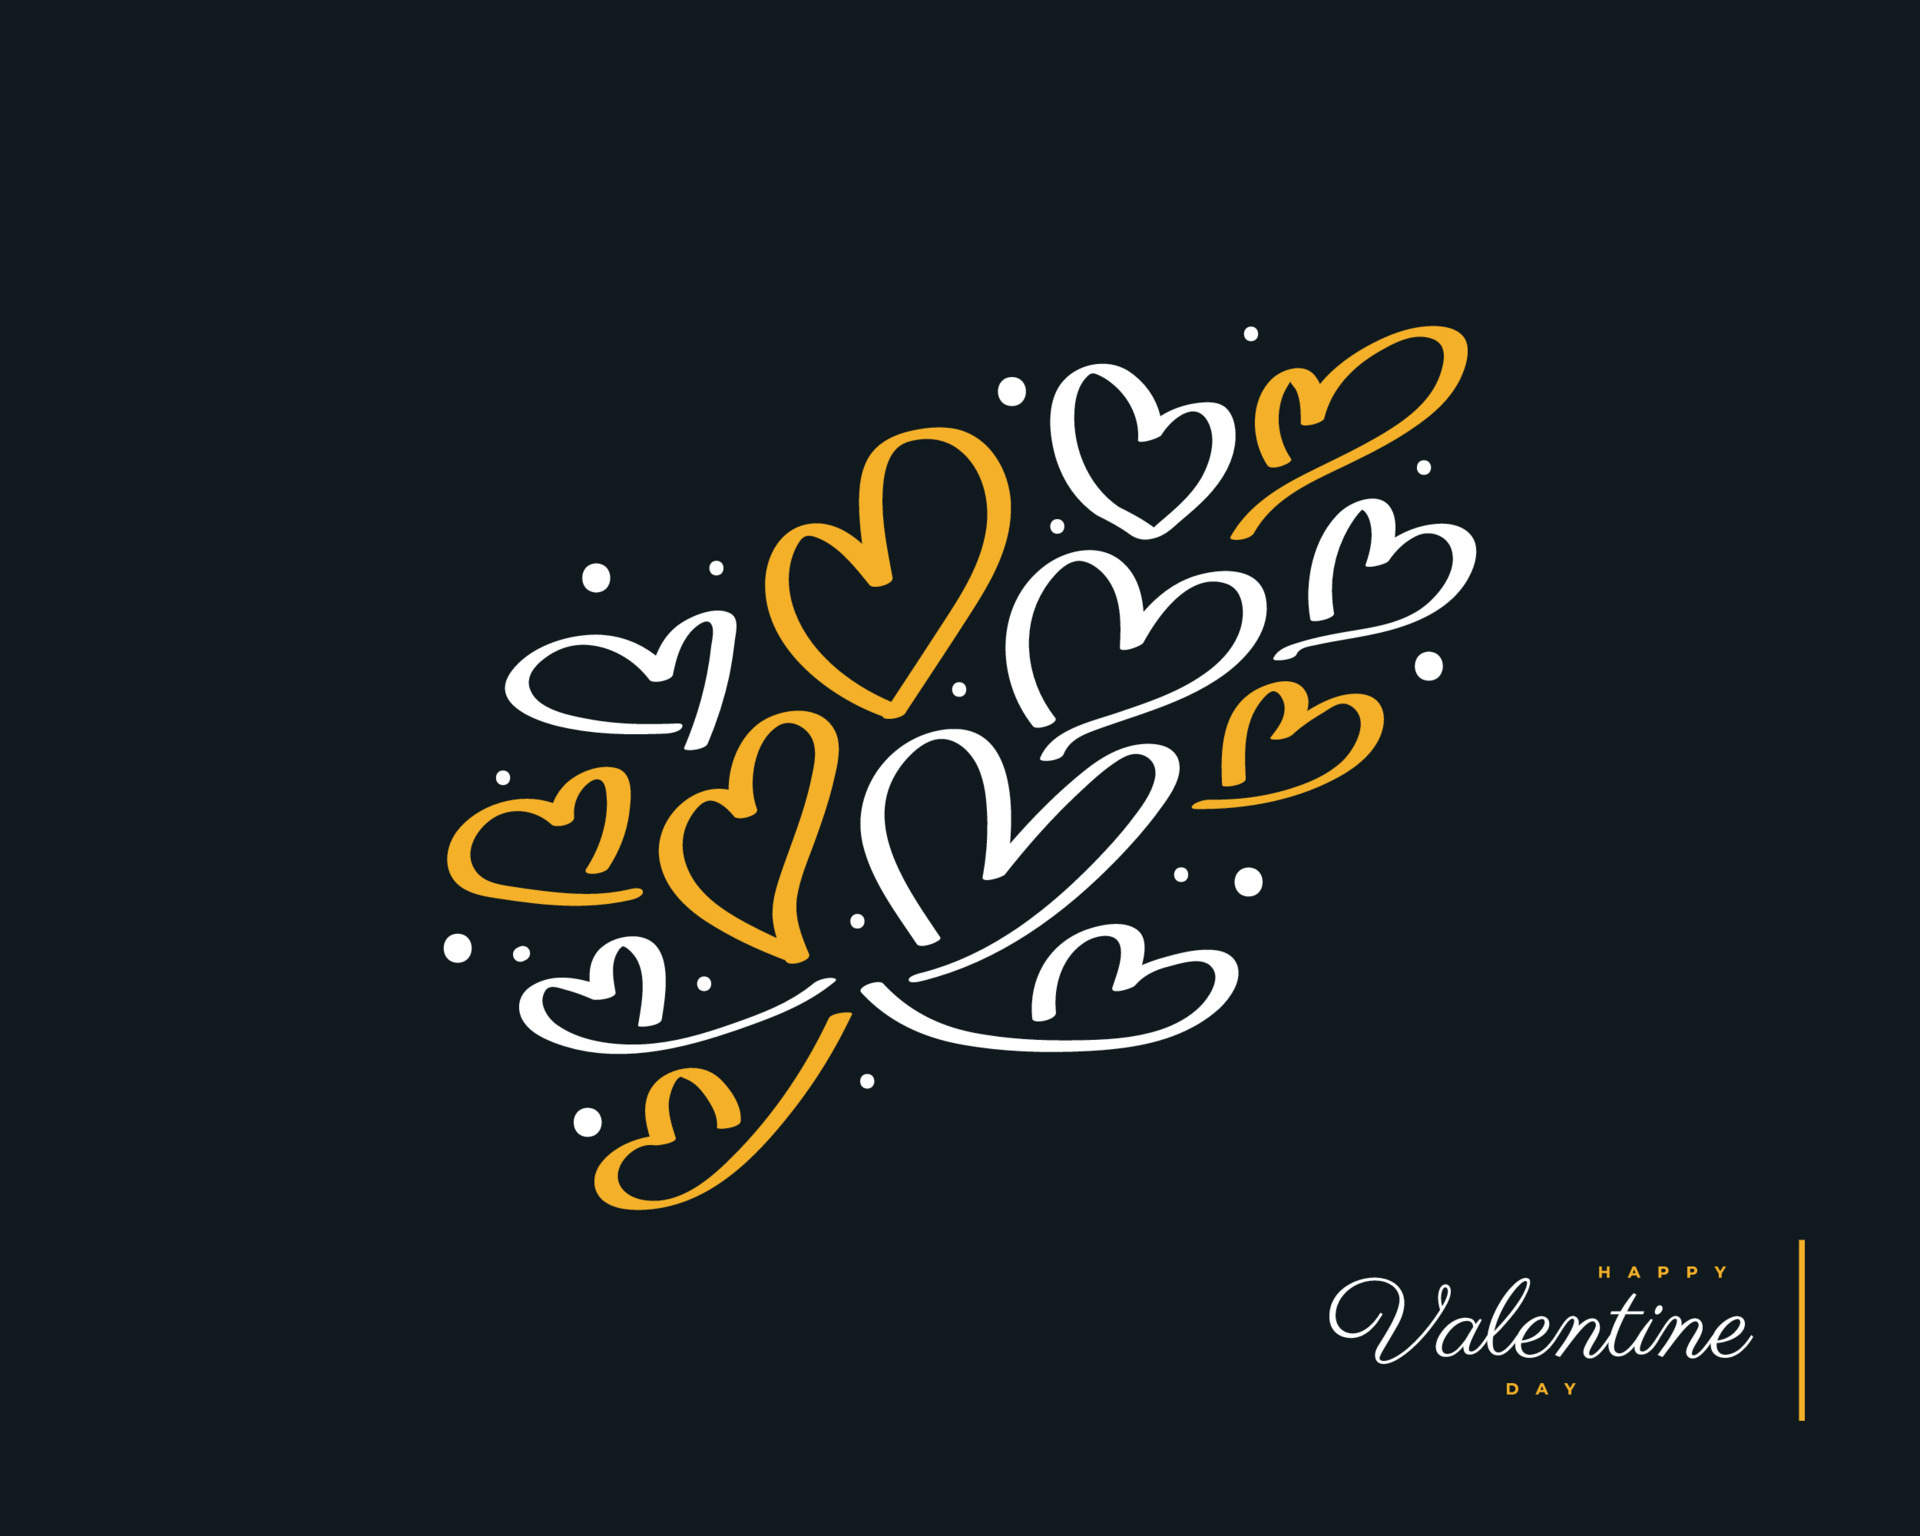 Cute White and Yellow Doodle Heart Illustration for Valentine's Element. Valentine's Day Background for Wallpaper, Flyers, Invitation, Posters, Brochure, Banner or Postcard